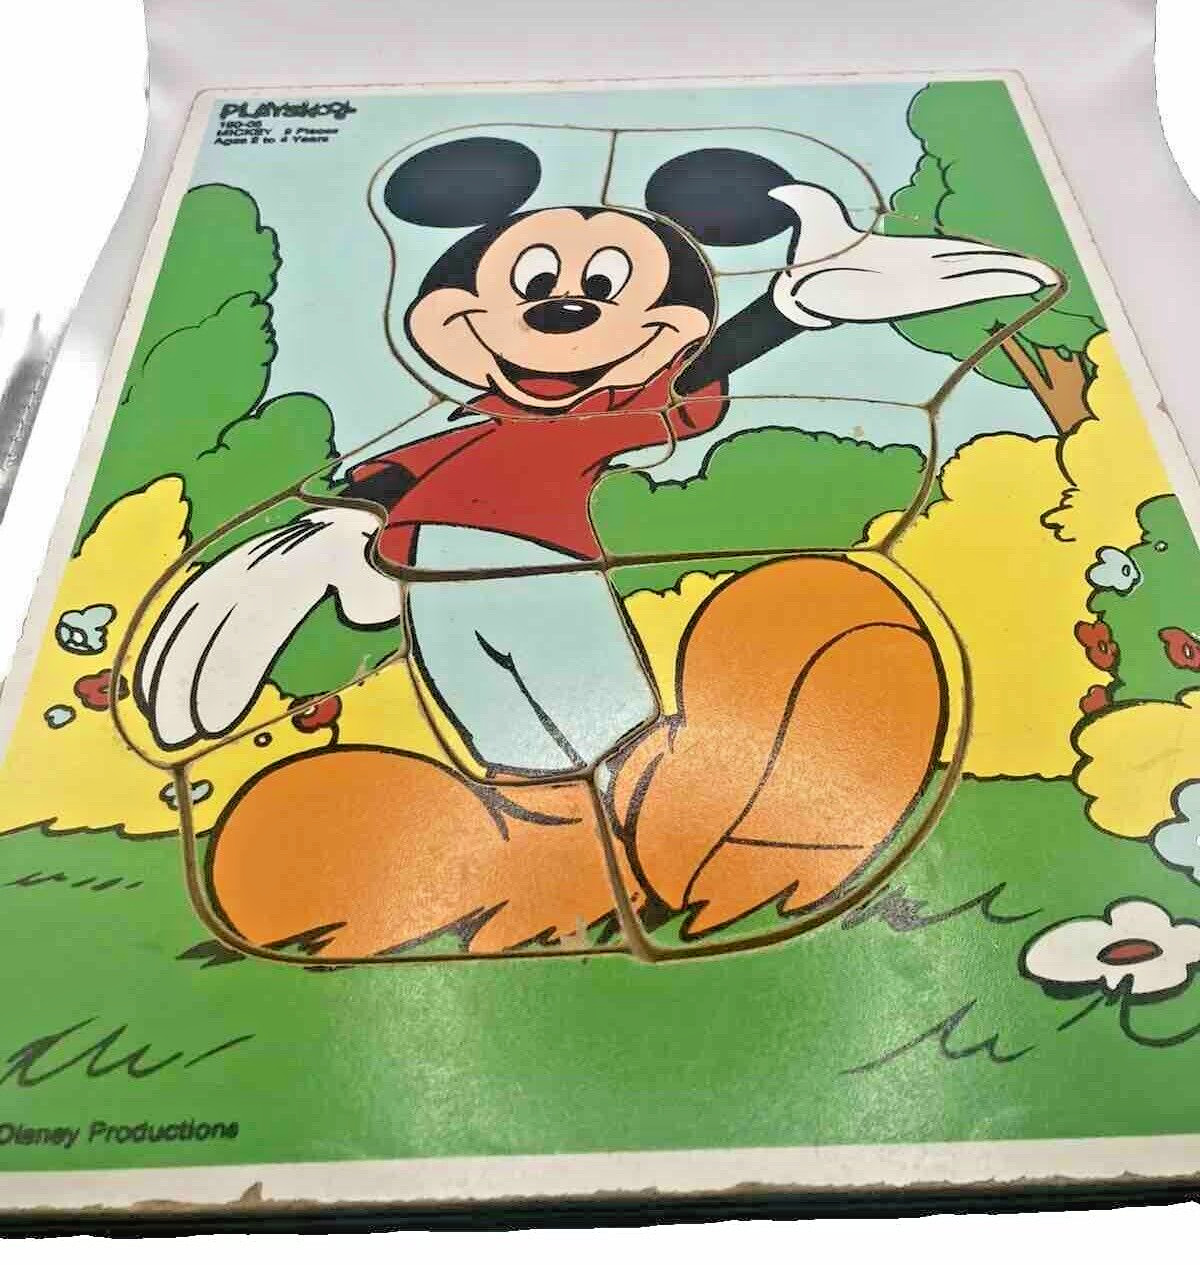 Vintage 1980’s Wooden PLAYSKOOL MICKEY MOUSE (9 Piece) Puzzle # 190-05 ~Complete